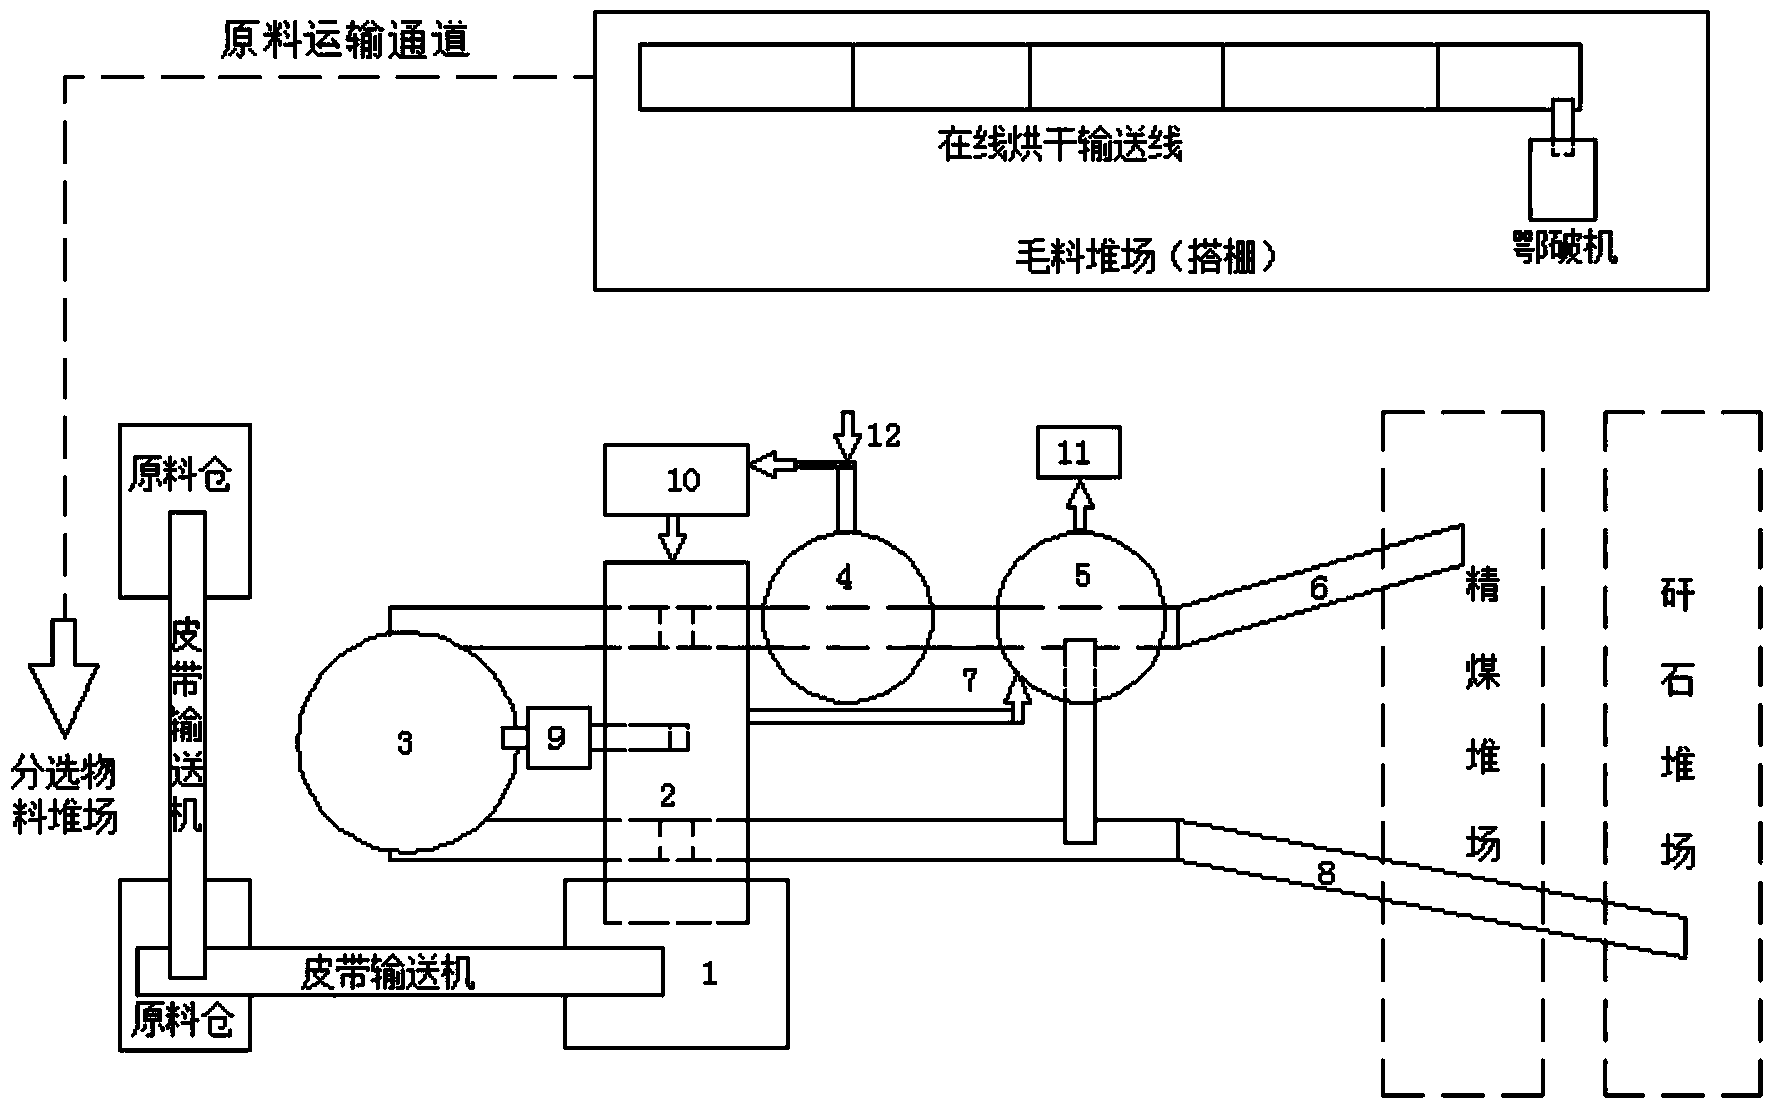 Multistage combined type dry method coal dressing system and method